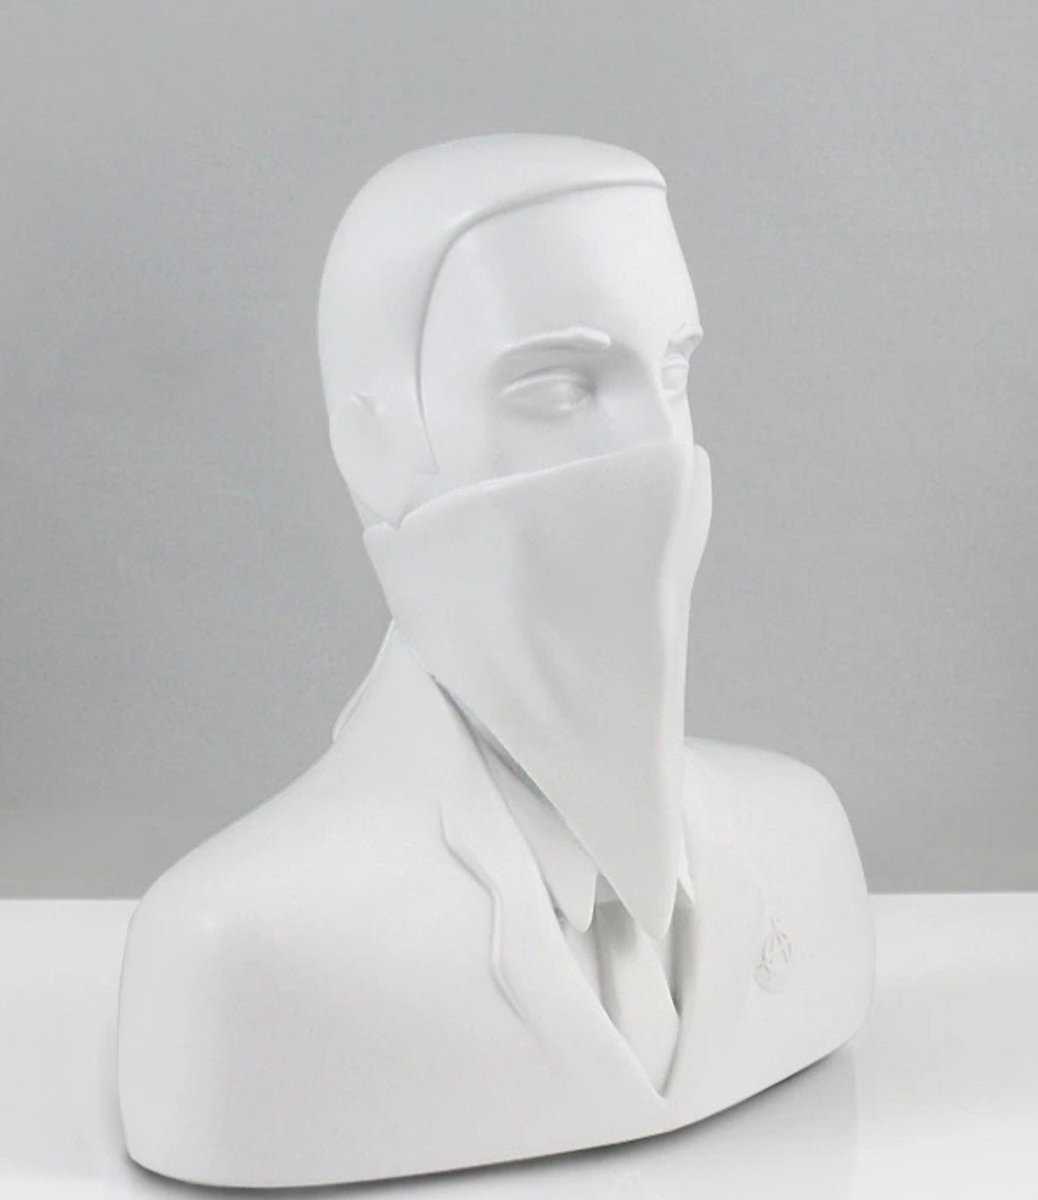 sprayedpaint.com/products/abcnt…
ABCNT Masked Bust Ivory White Sculpture by ABCNT
#sculpture #artsculpture #ArtStatue #PopArtSculpture #GraffitiSculpture #art #graffiti #streetart #2020 #ABCNT #Activism #Anarchy #Face & Head #Man #Mask #Plastic #Protest #Resin #Riot #Sale #Stencil #Whi...